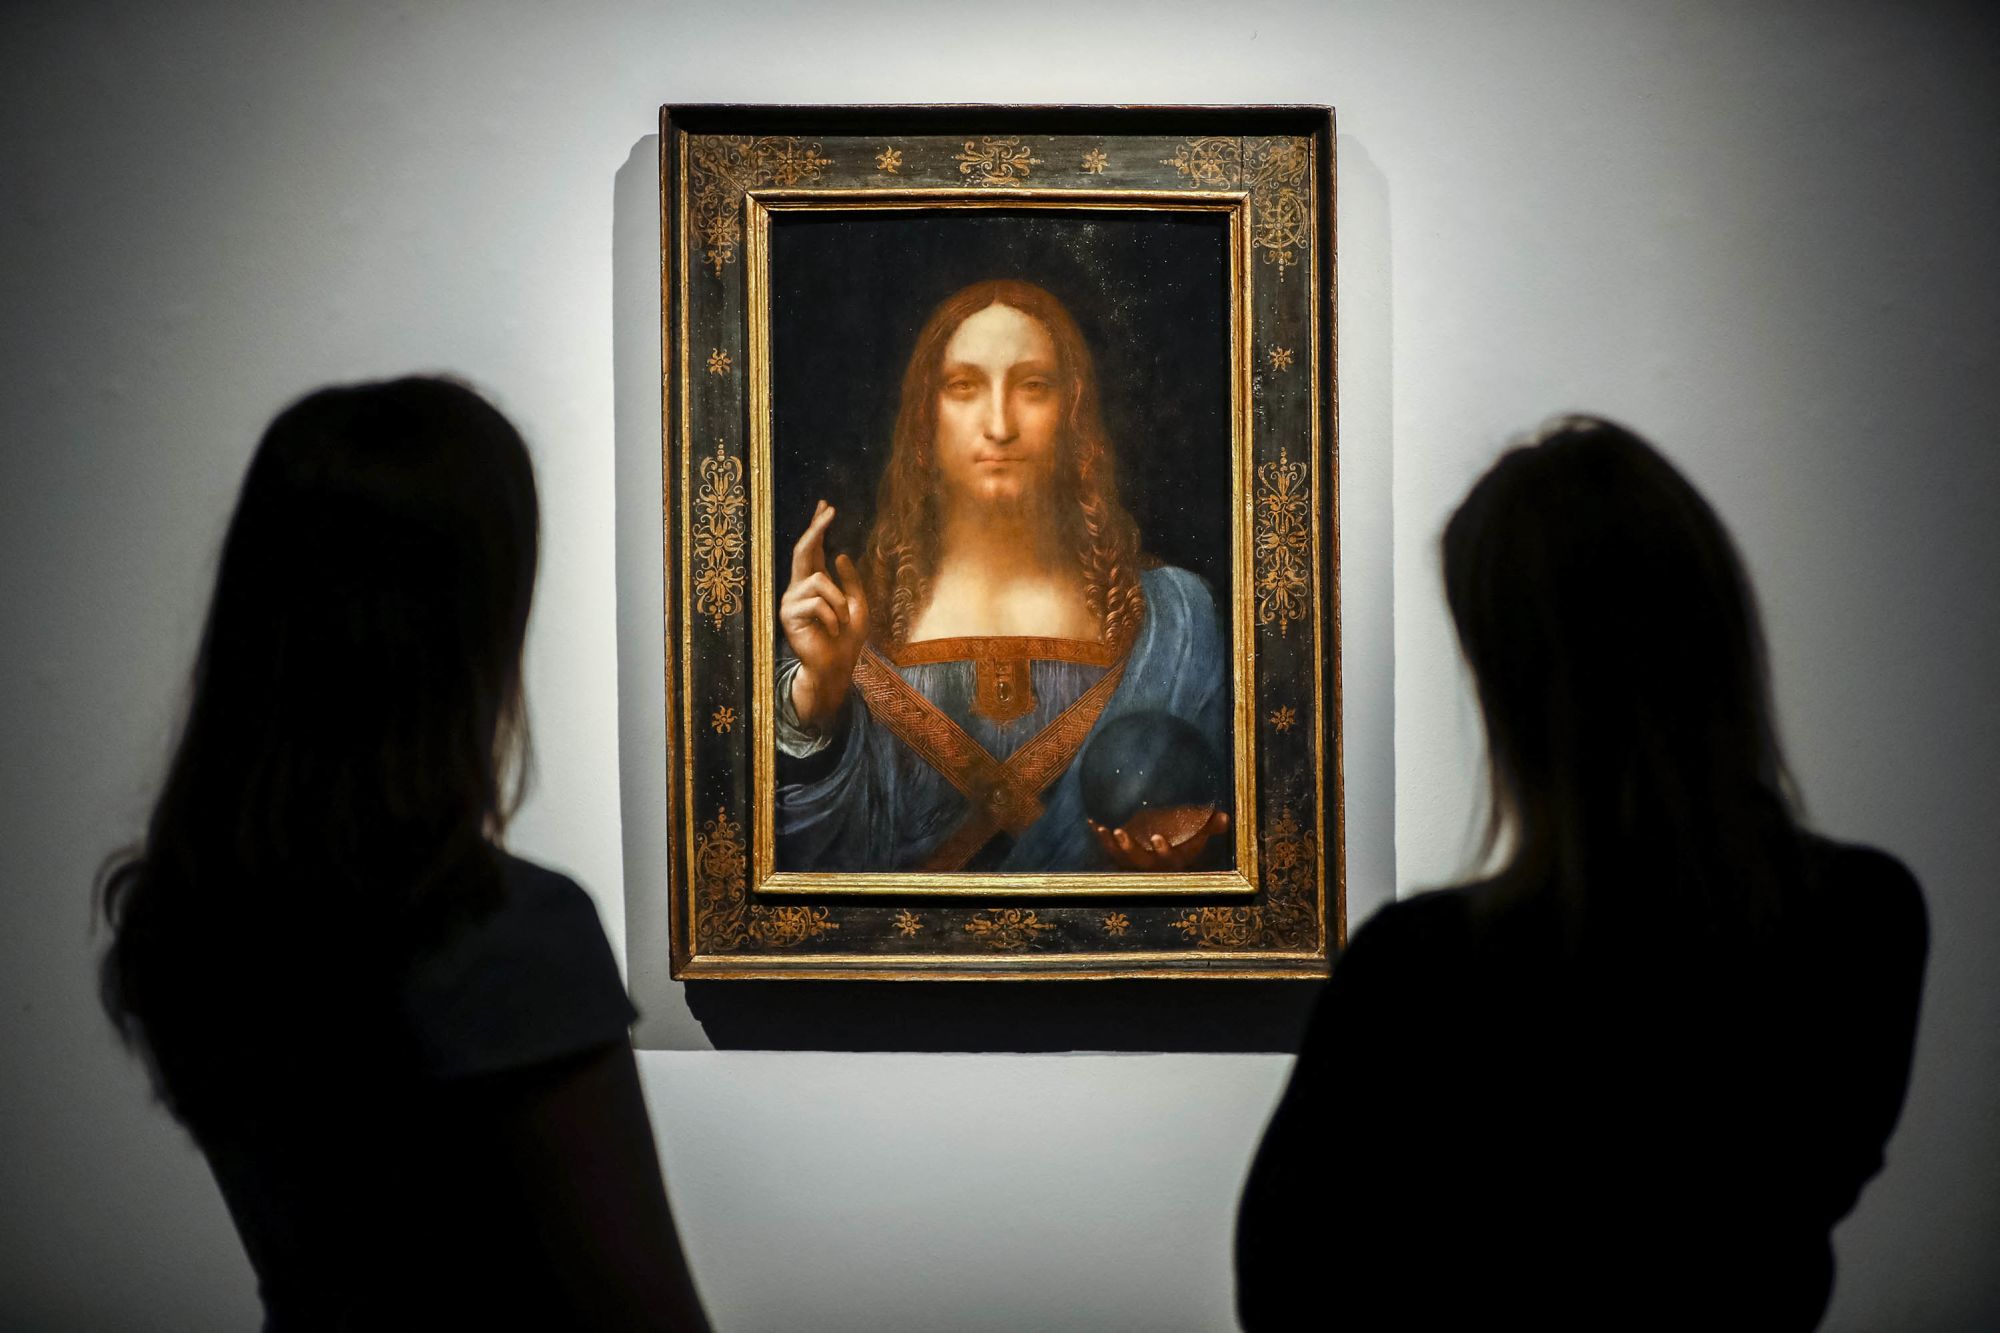 Leonardo da Vinci's "Salvator Mundi," on display at Christie's auction house in October 2017. The work fetched a record $450.3m at auction in New York in November 2017.